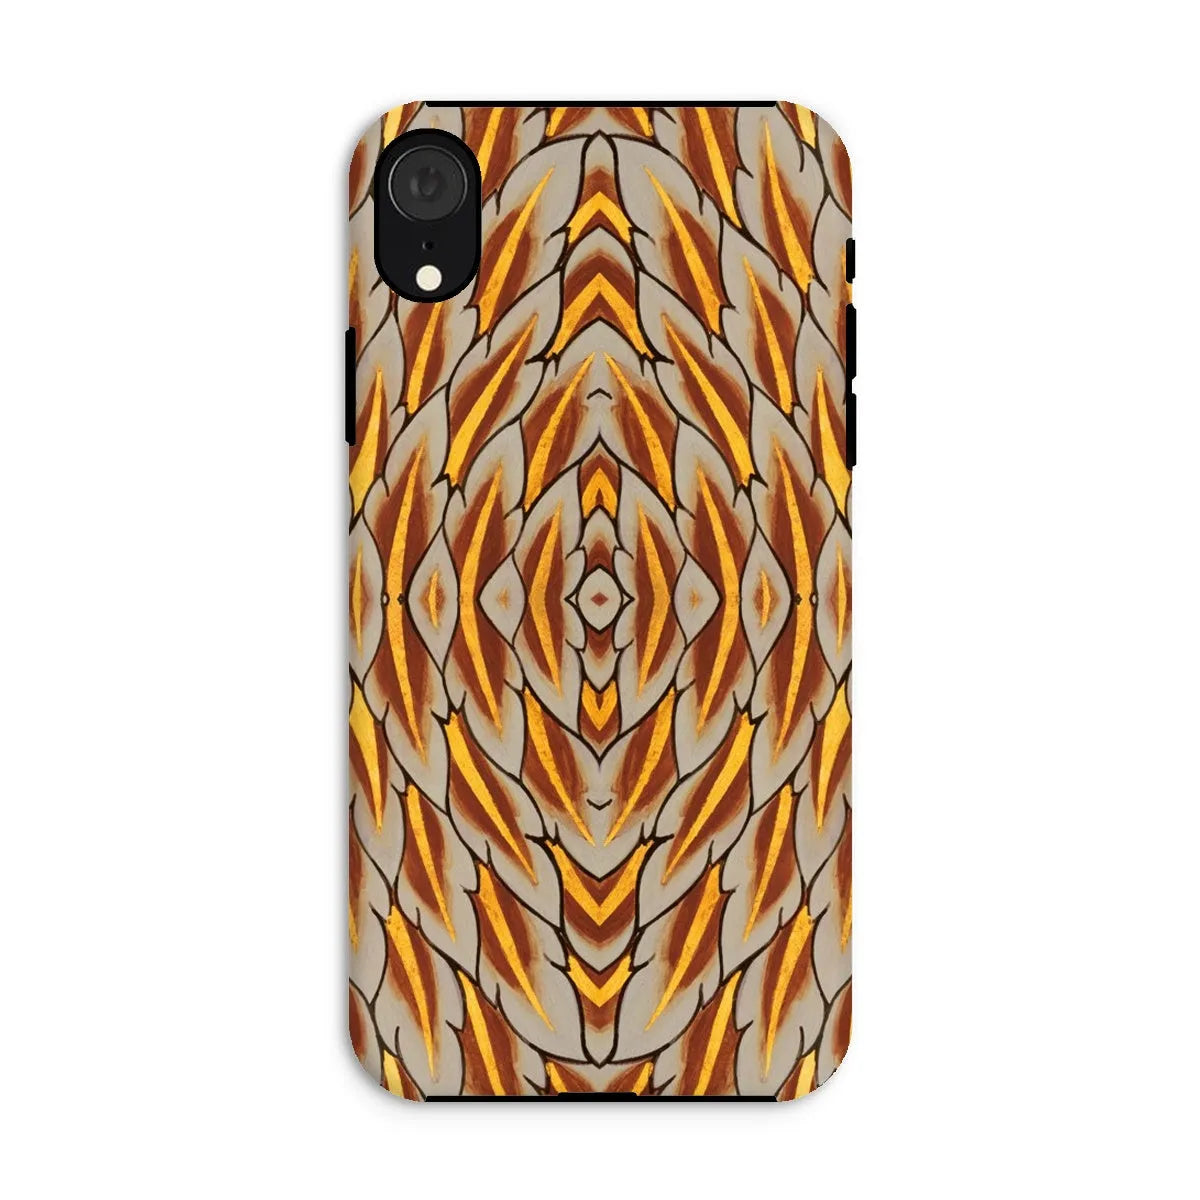 Featherweight Champion Art Phone Case - Thai Garuda Feathers - Iphone Xr / Matte - Mobile Phone Cases - Aesthetic Art